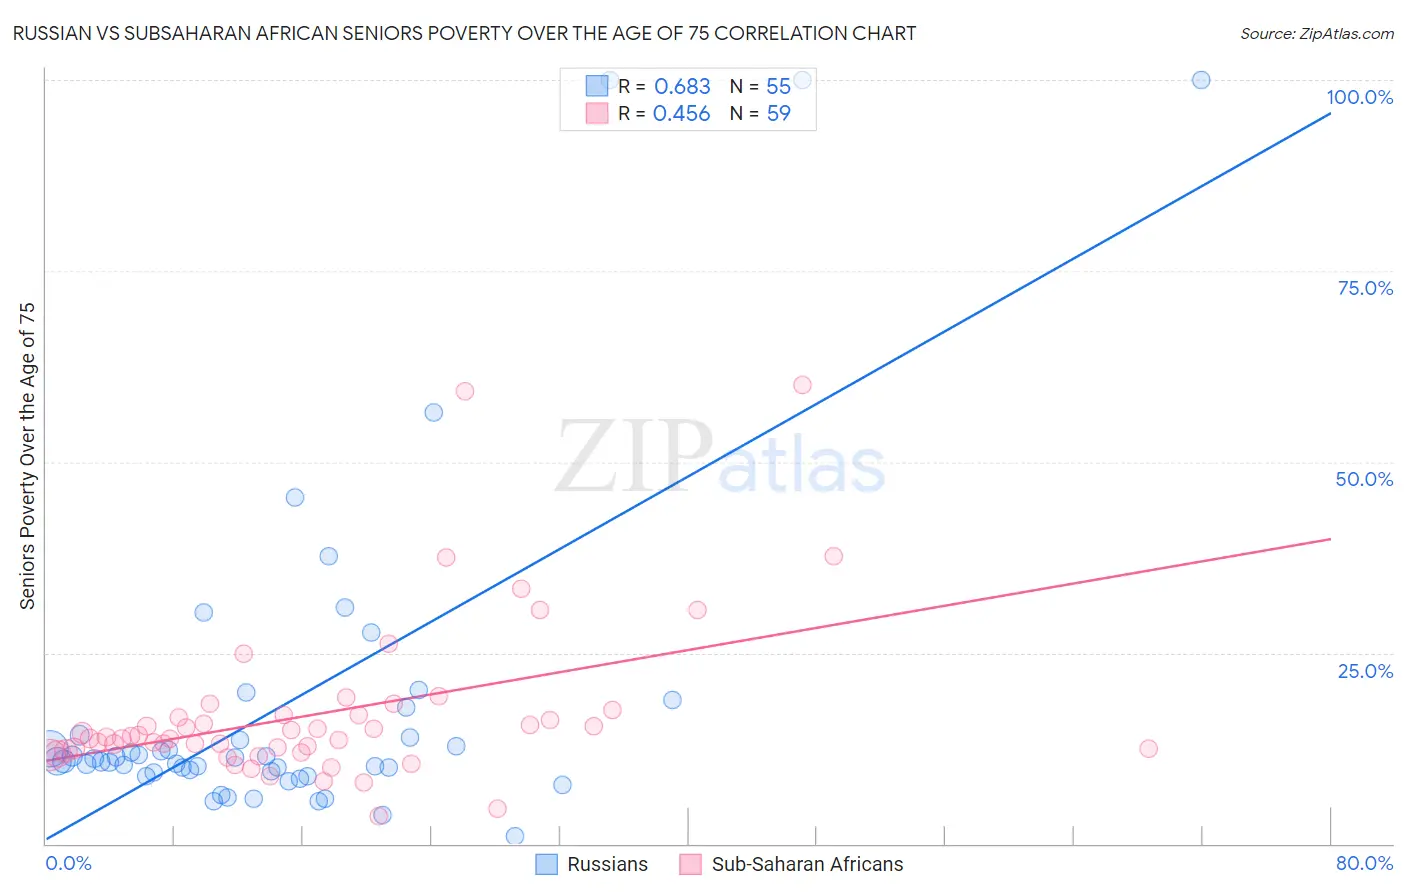 Russian vs Subsaharan African Seniors Poverty Over the Age of 75